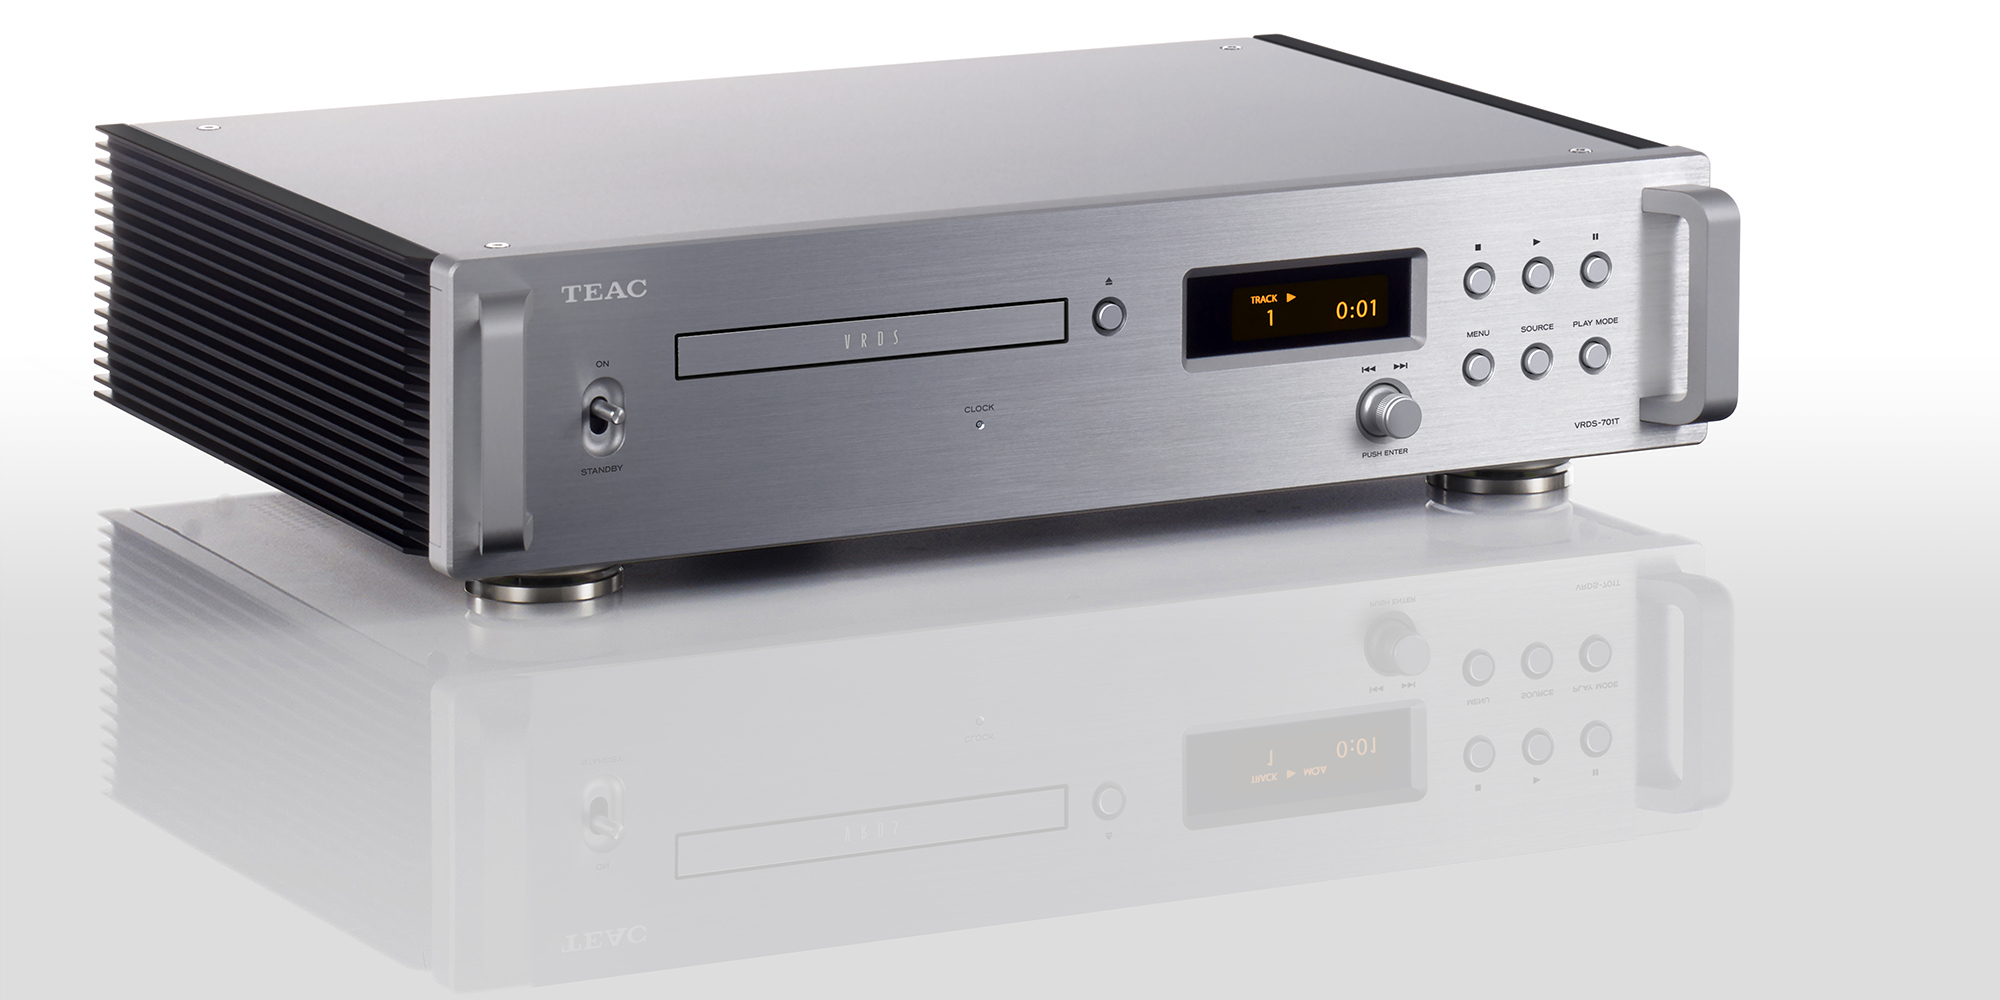 Schiit Happened: The Story of the World's Most Improbable Start-Up